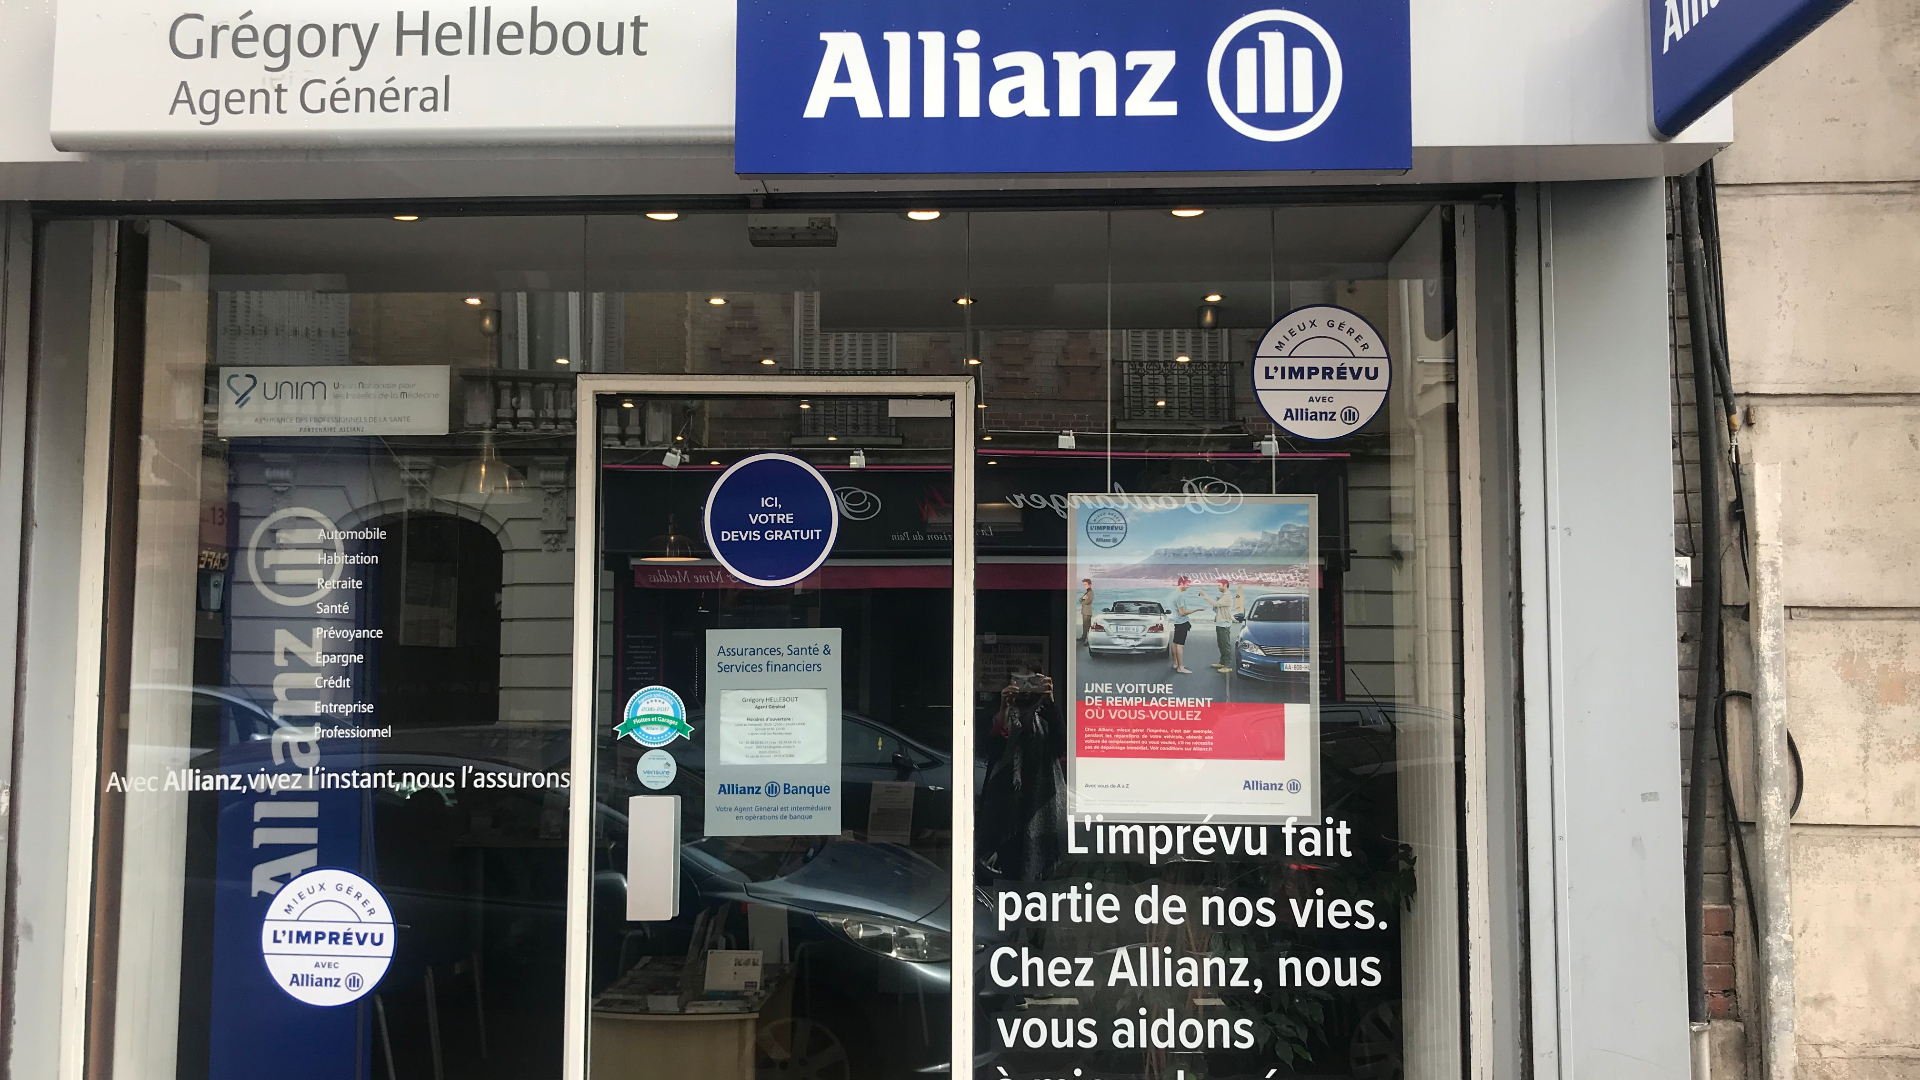 Allianz AULNAY SOUS BOIS - Gregory HELLEBOUT